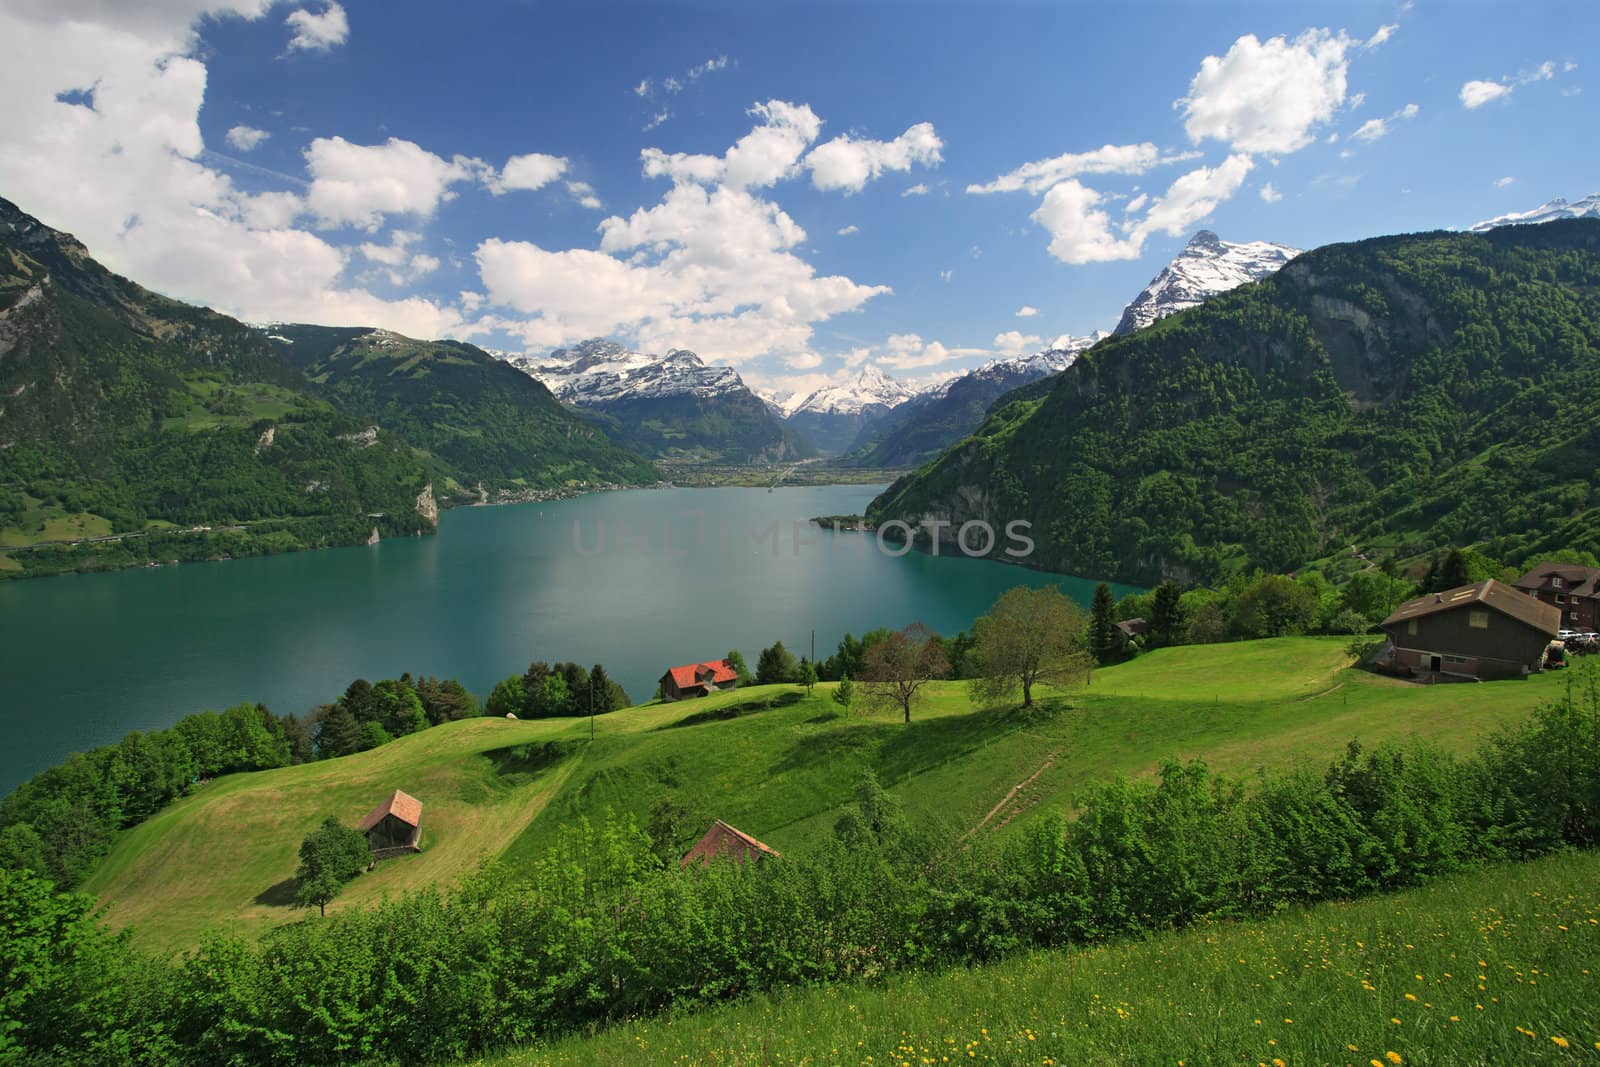 Looking over fields, farms and Lake Lucerne in Switzerland.